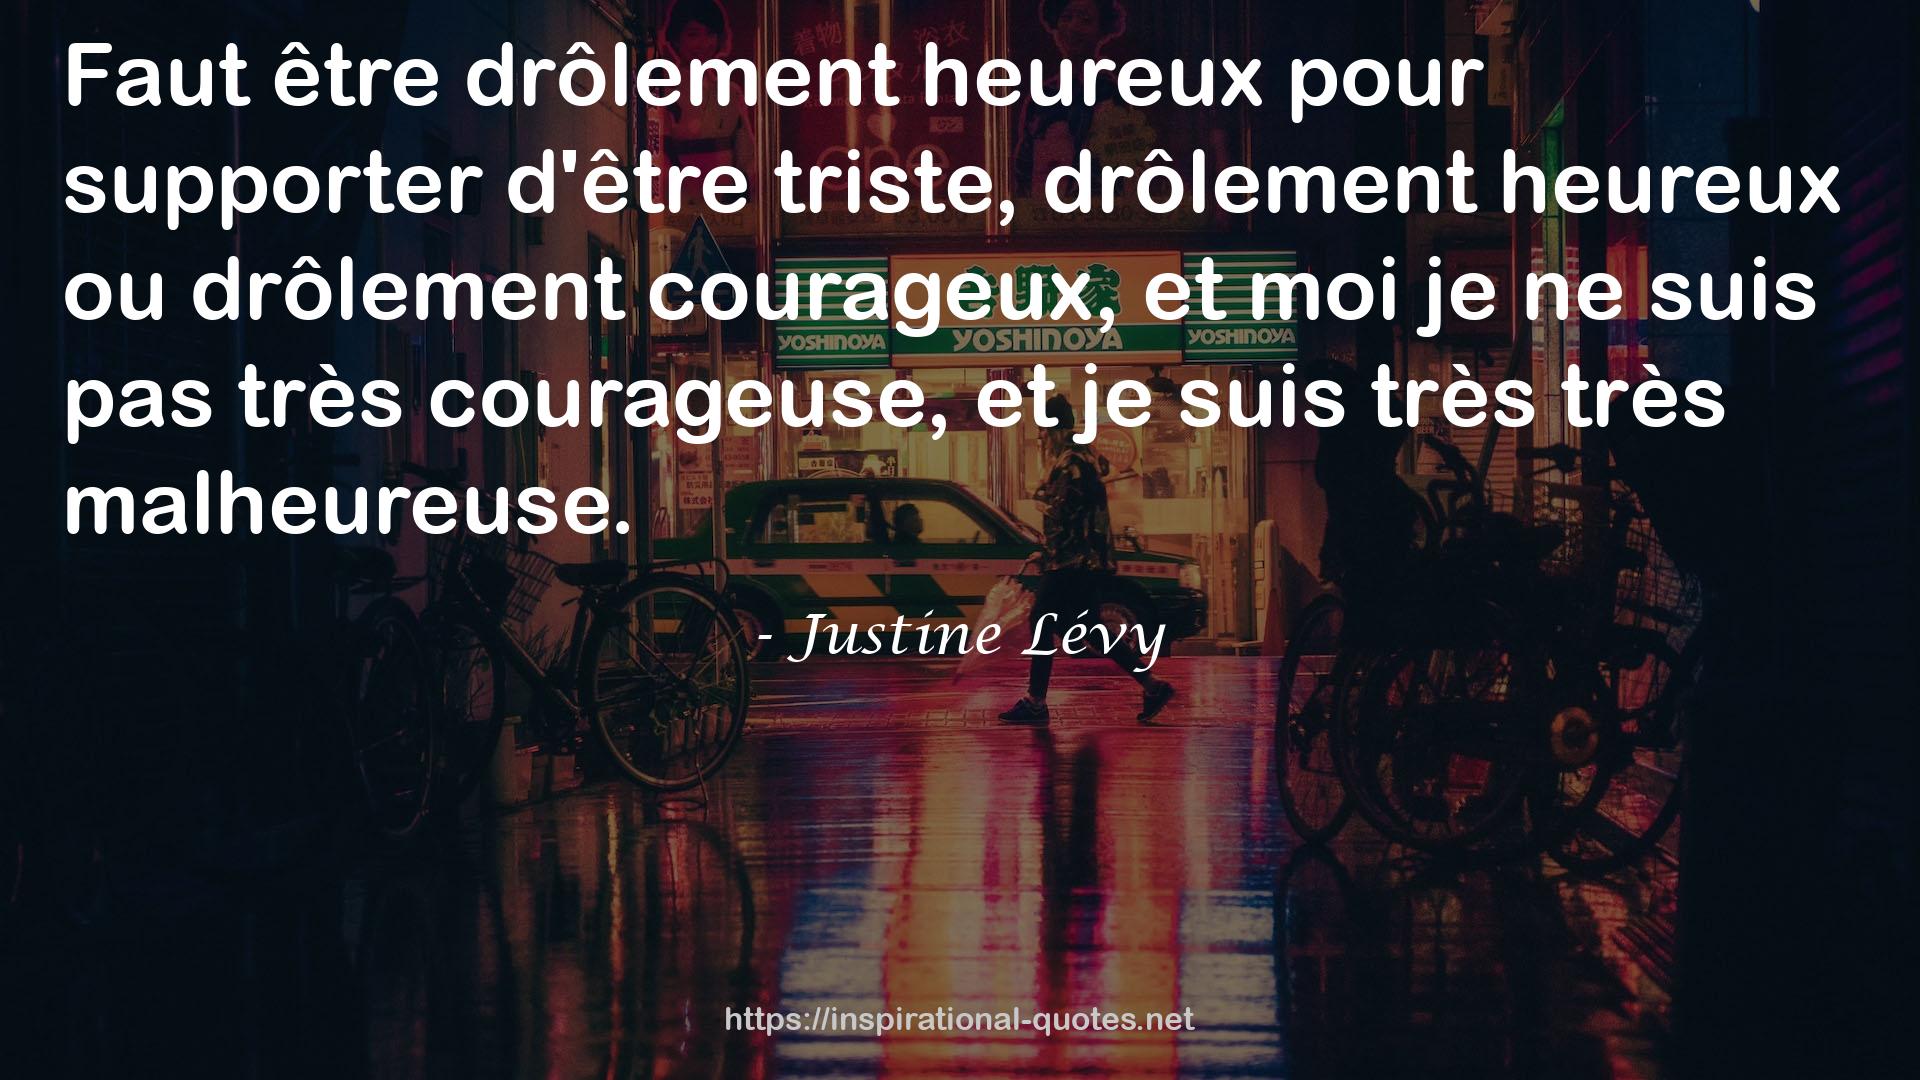 Justine Lévy QUOTES